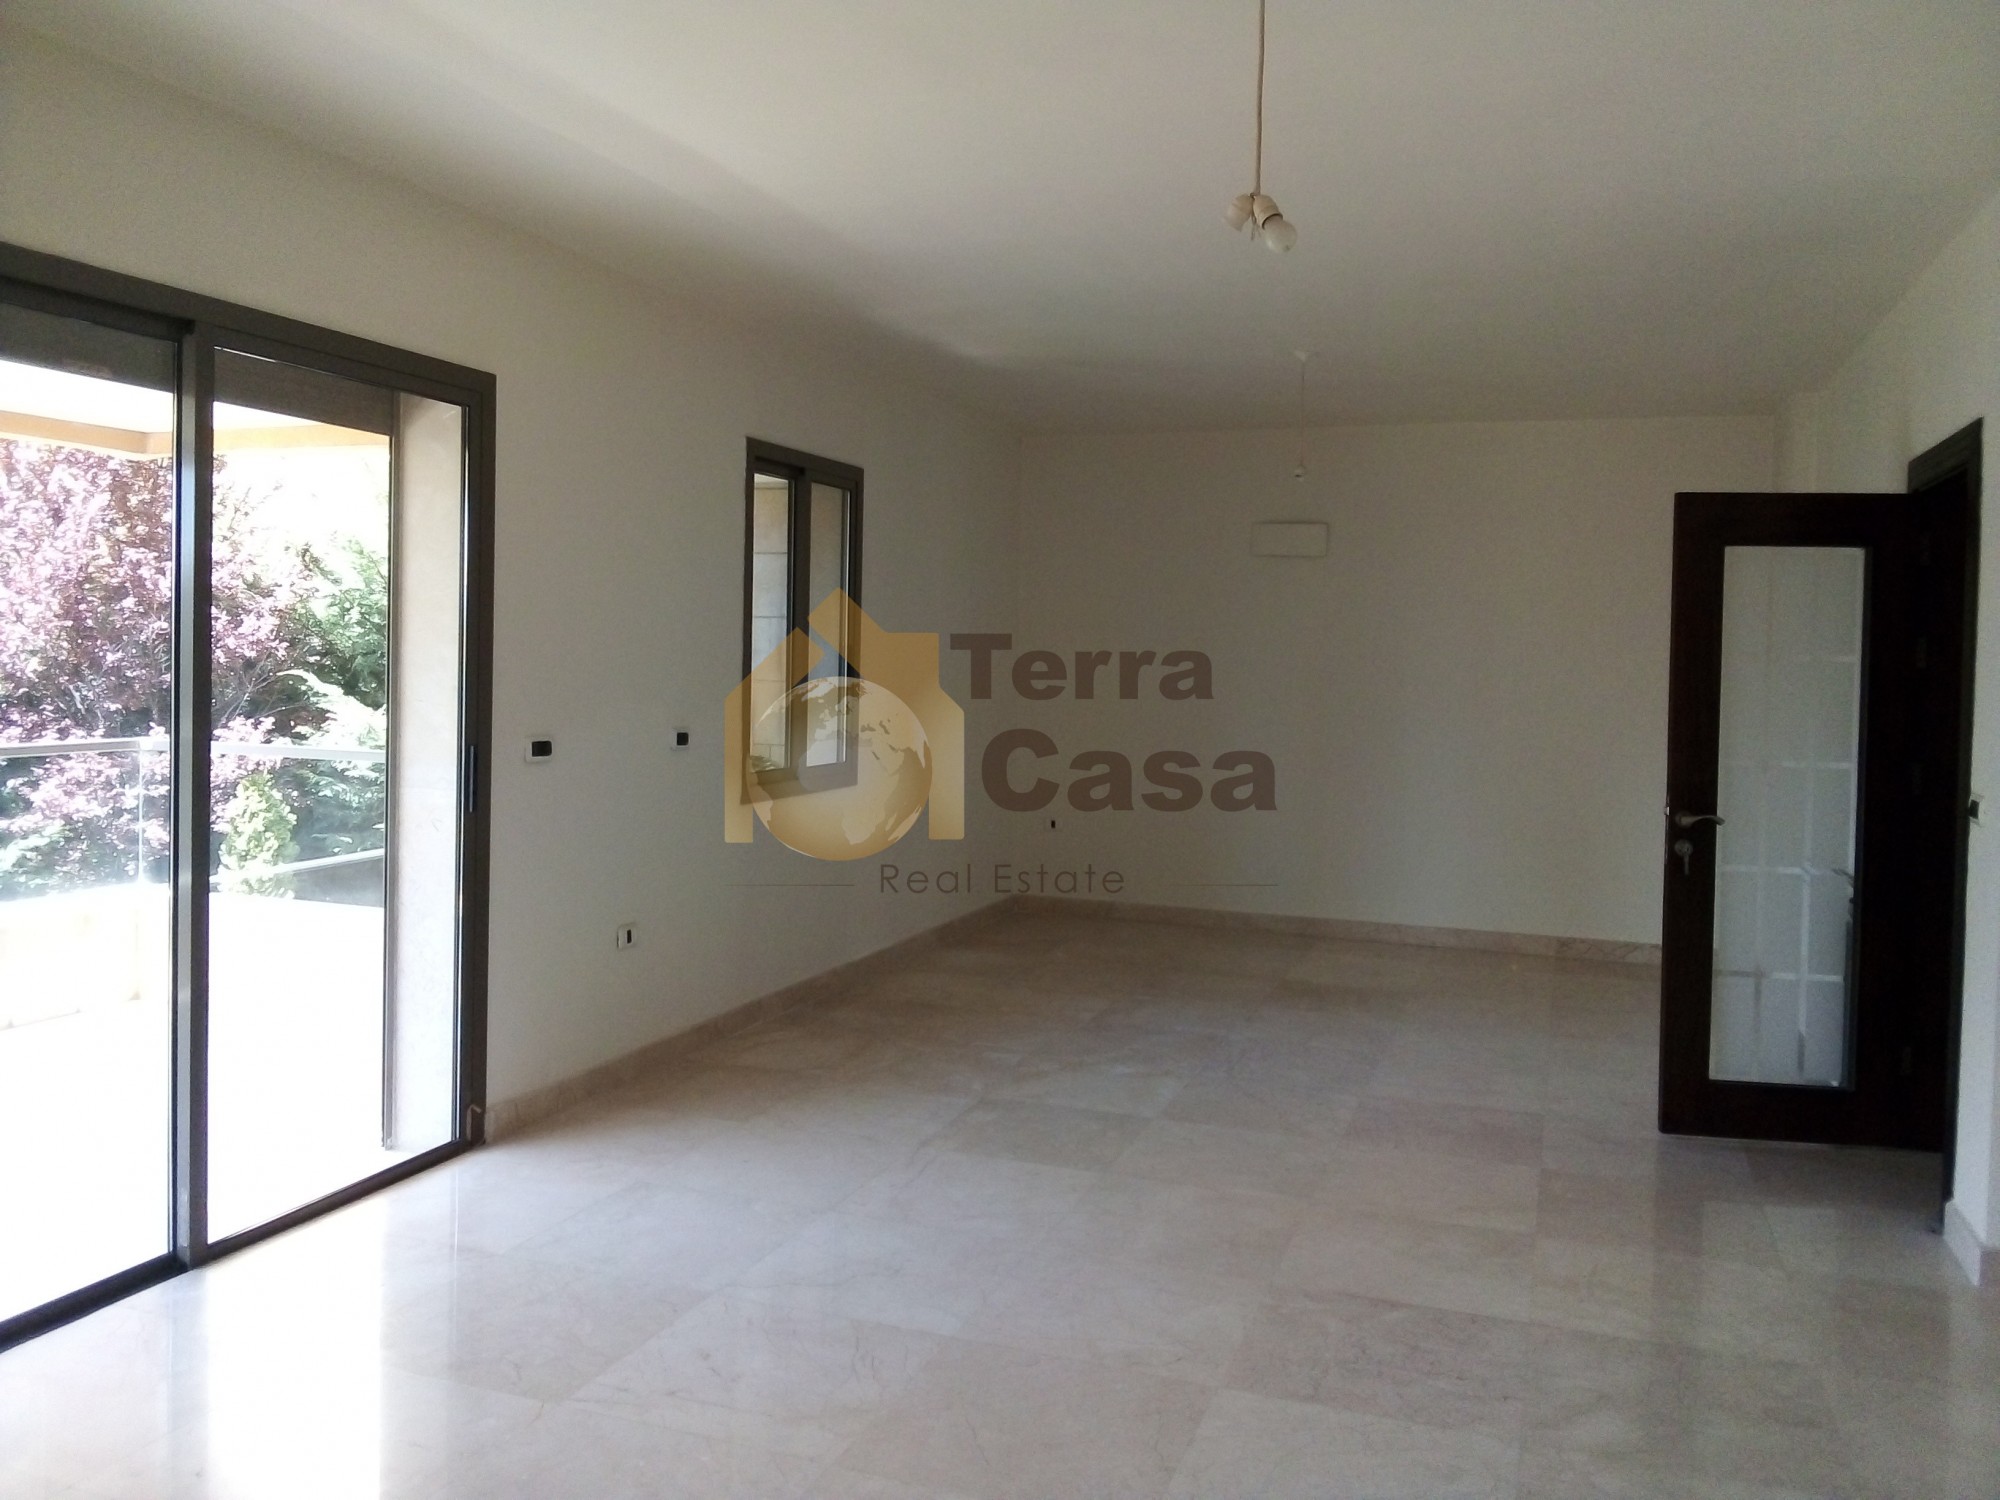 Apartment for sale in chtaura brand new luxurious finishing.